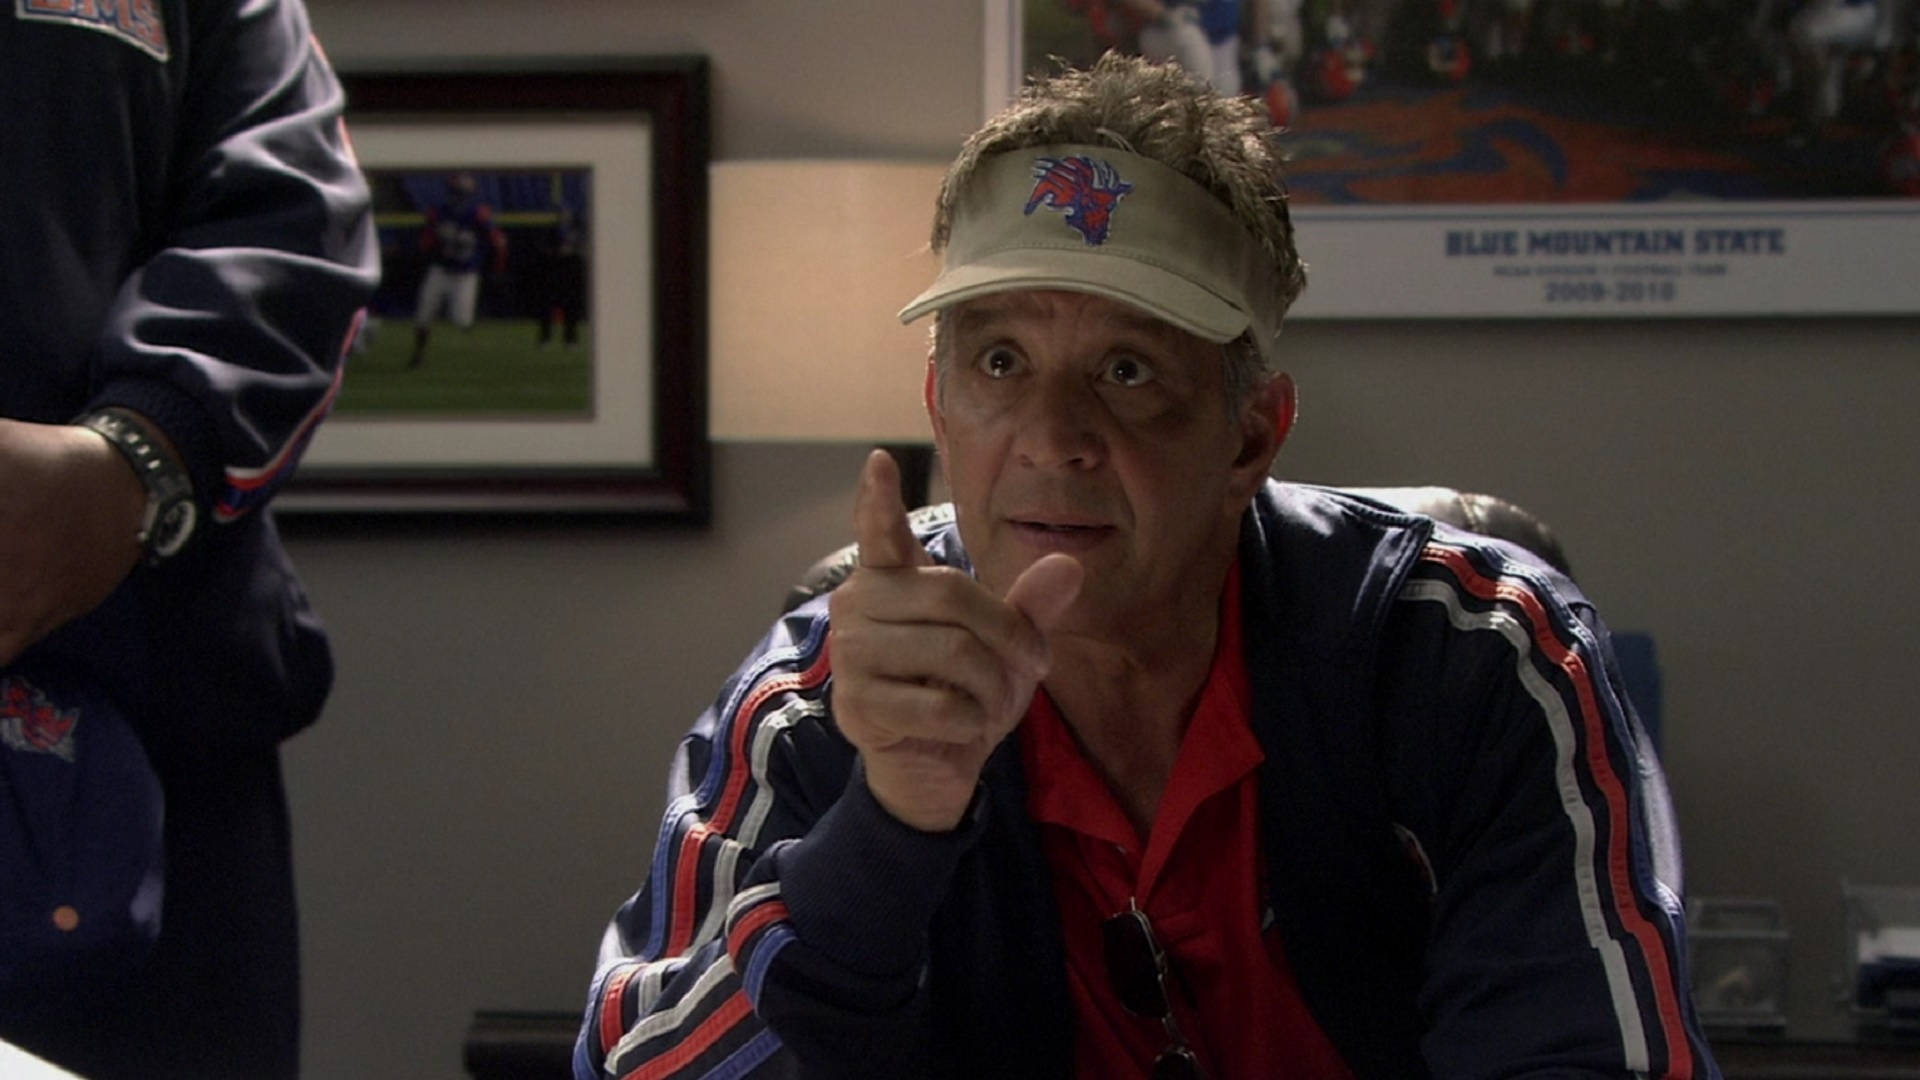 Blue Mountain State Old Coach Background